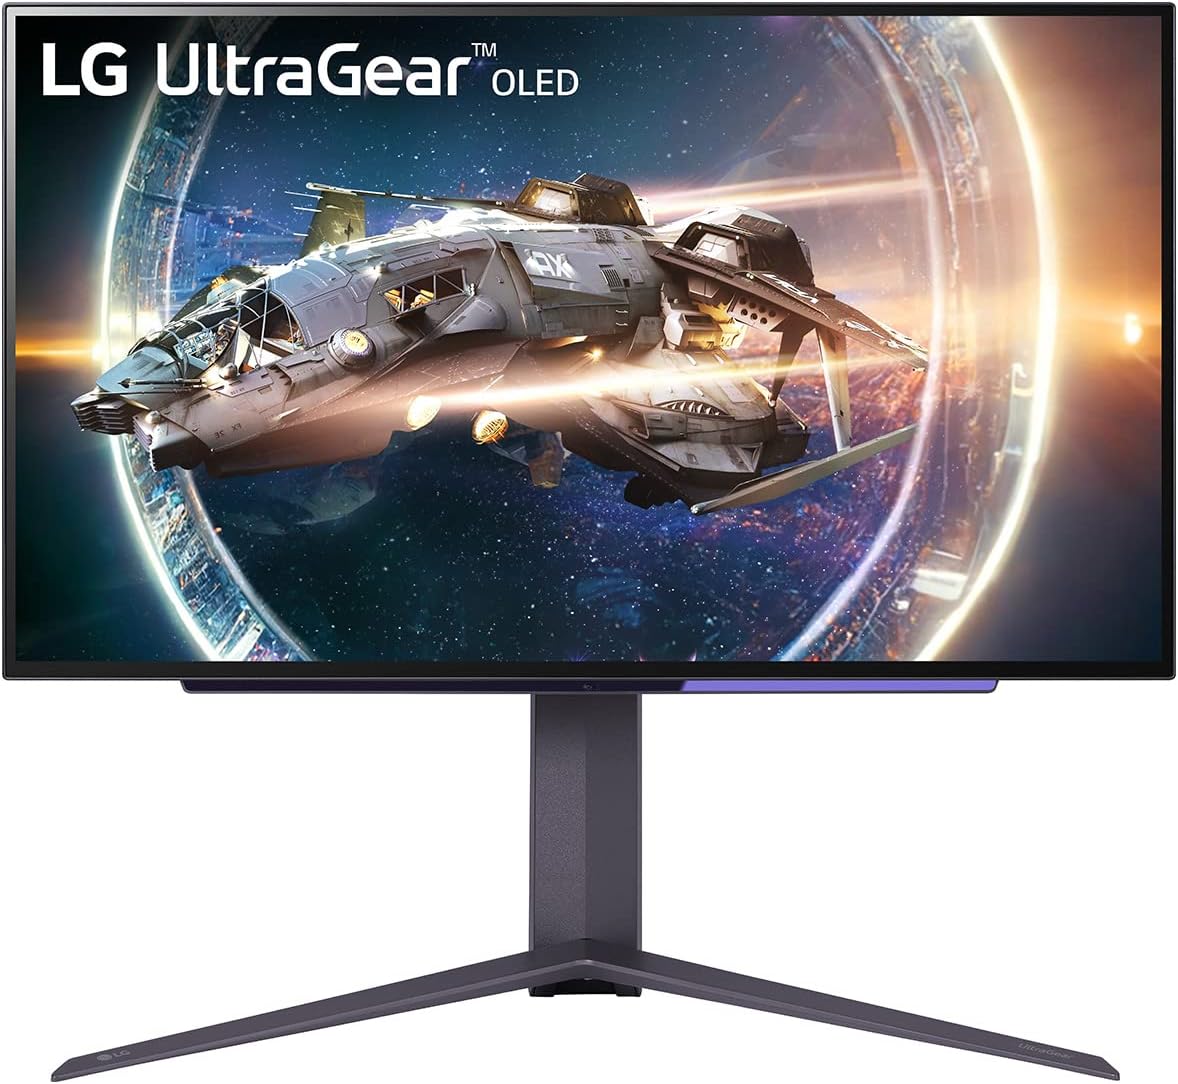 LG 27" Ultragear™ OLED QHD Gaming Monitor with 240Hz .03ms GtG & nVIDIA® G-SYNC® Compatible,Black $599.99